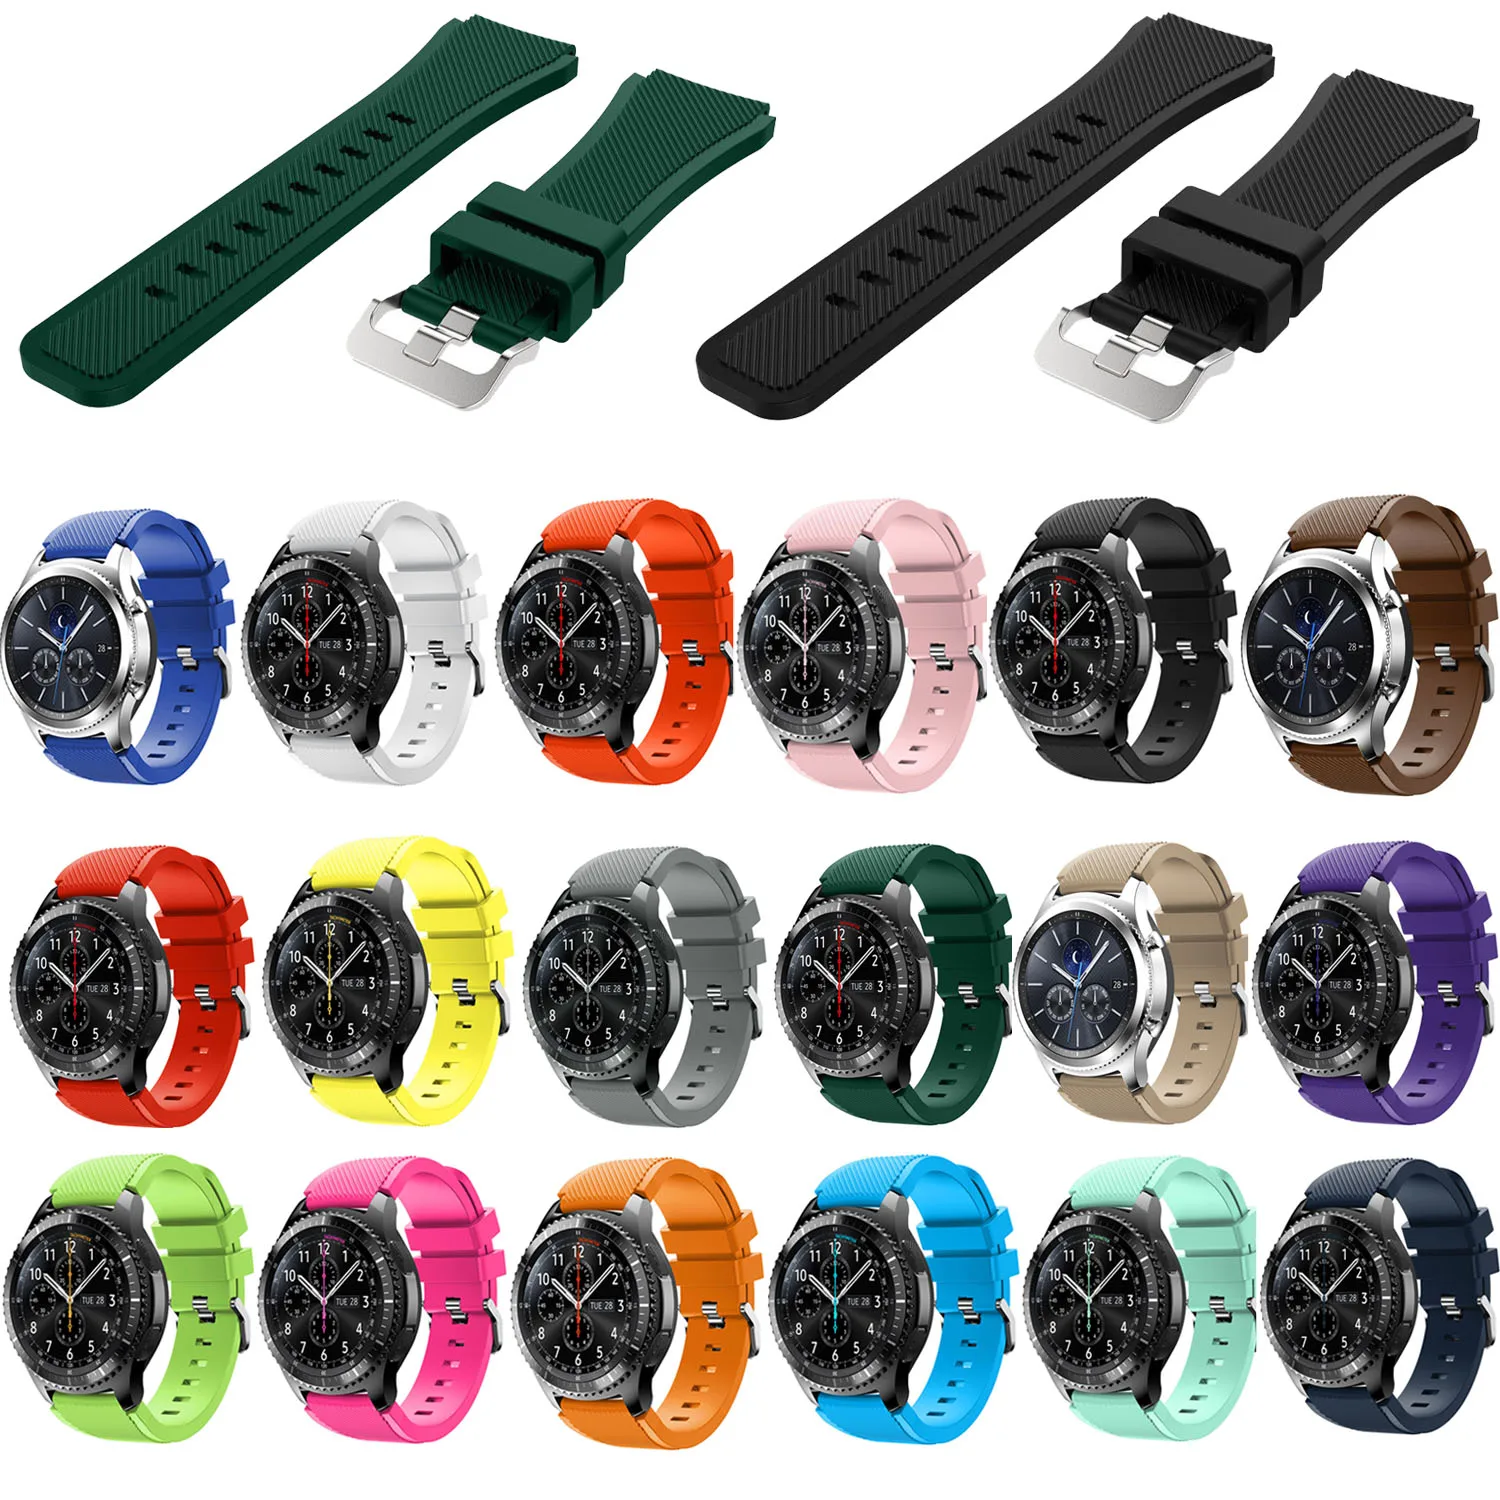 NEW Silicone Bracelet Wrist Band Strap For Samsung Gear S3 Frontier/Classic 